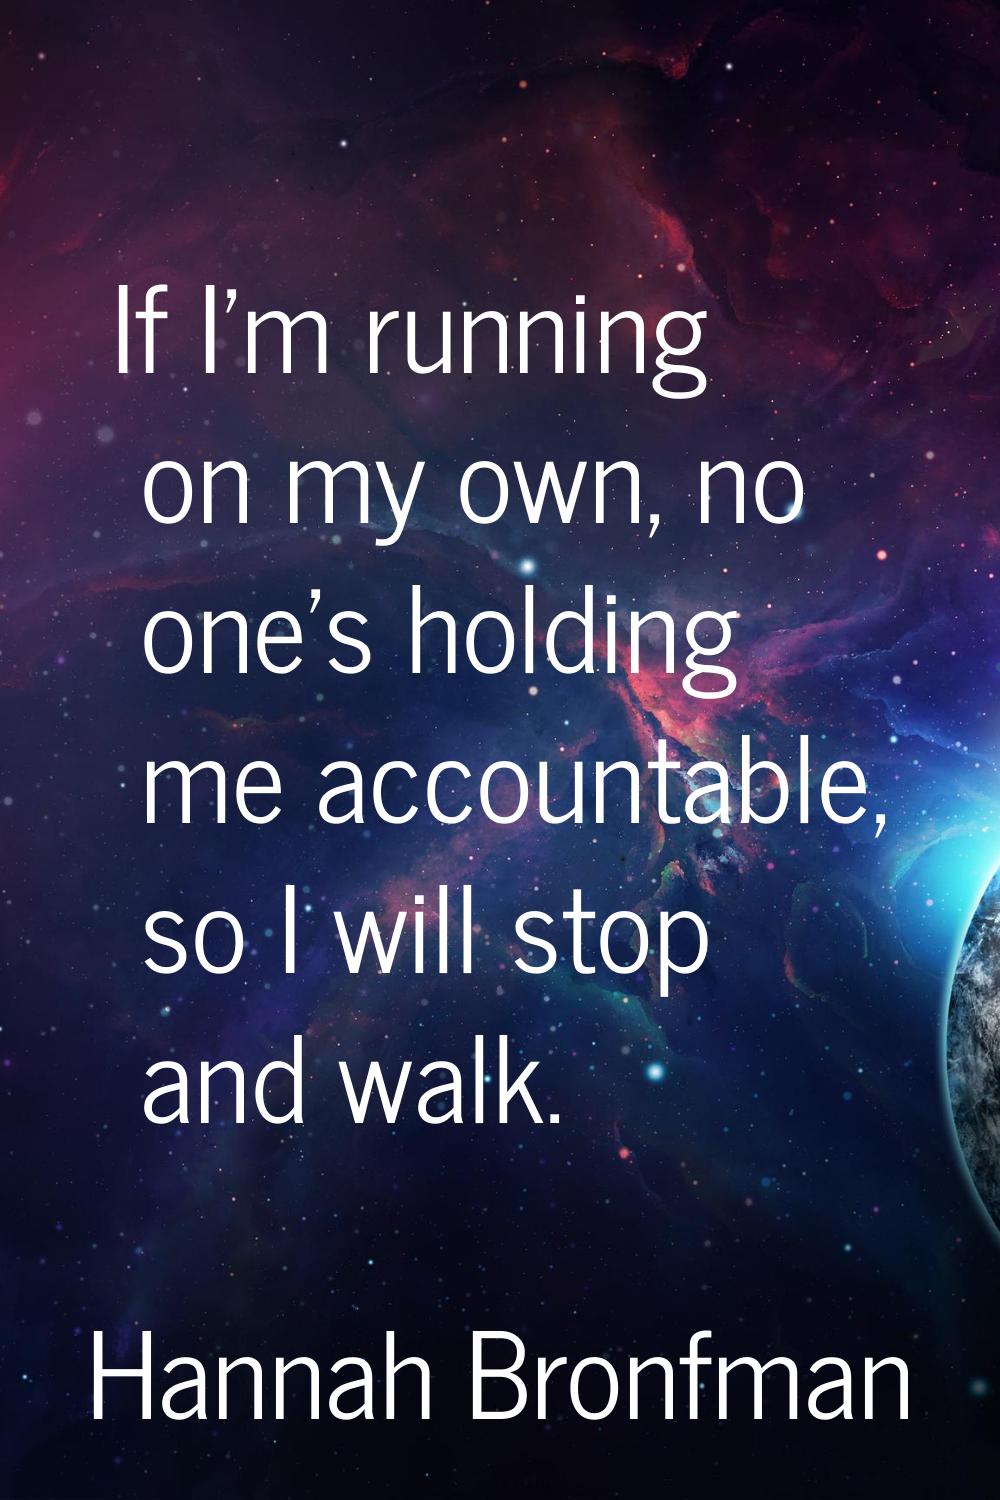 If I'm running on my own, no one's holding me accountable, so I will stop and walk.